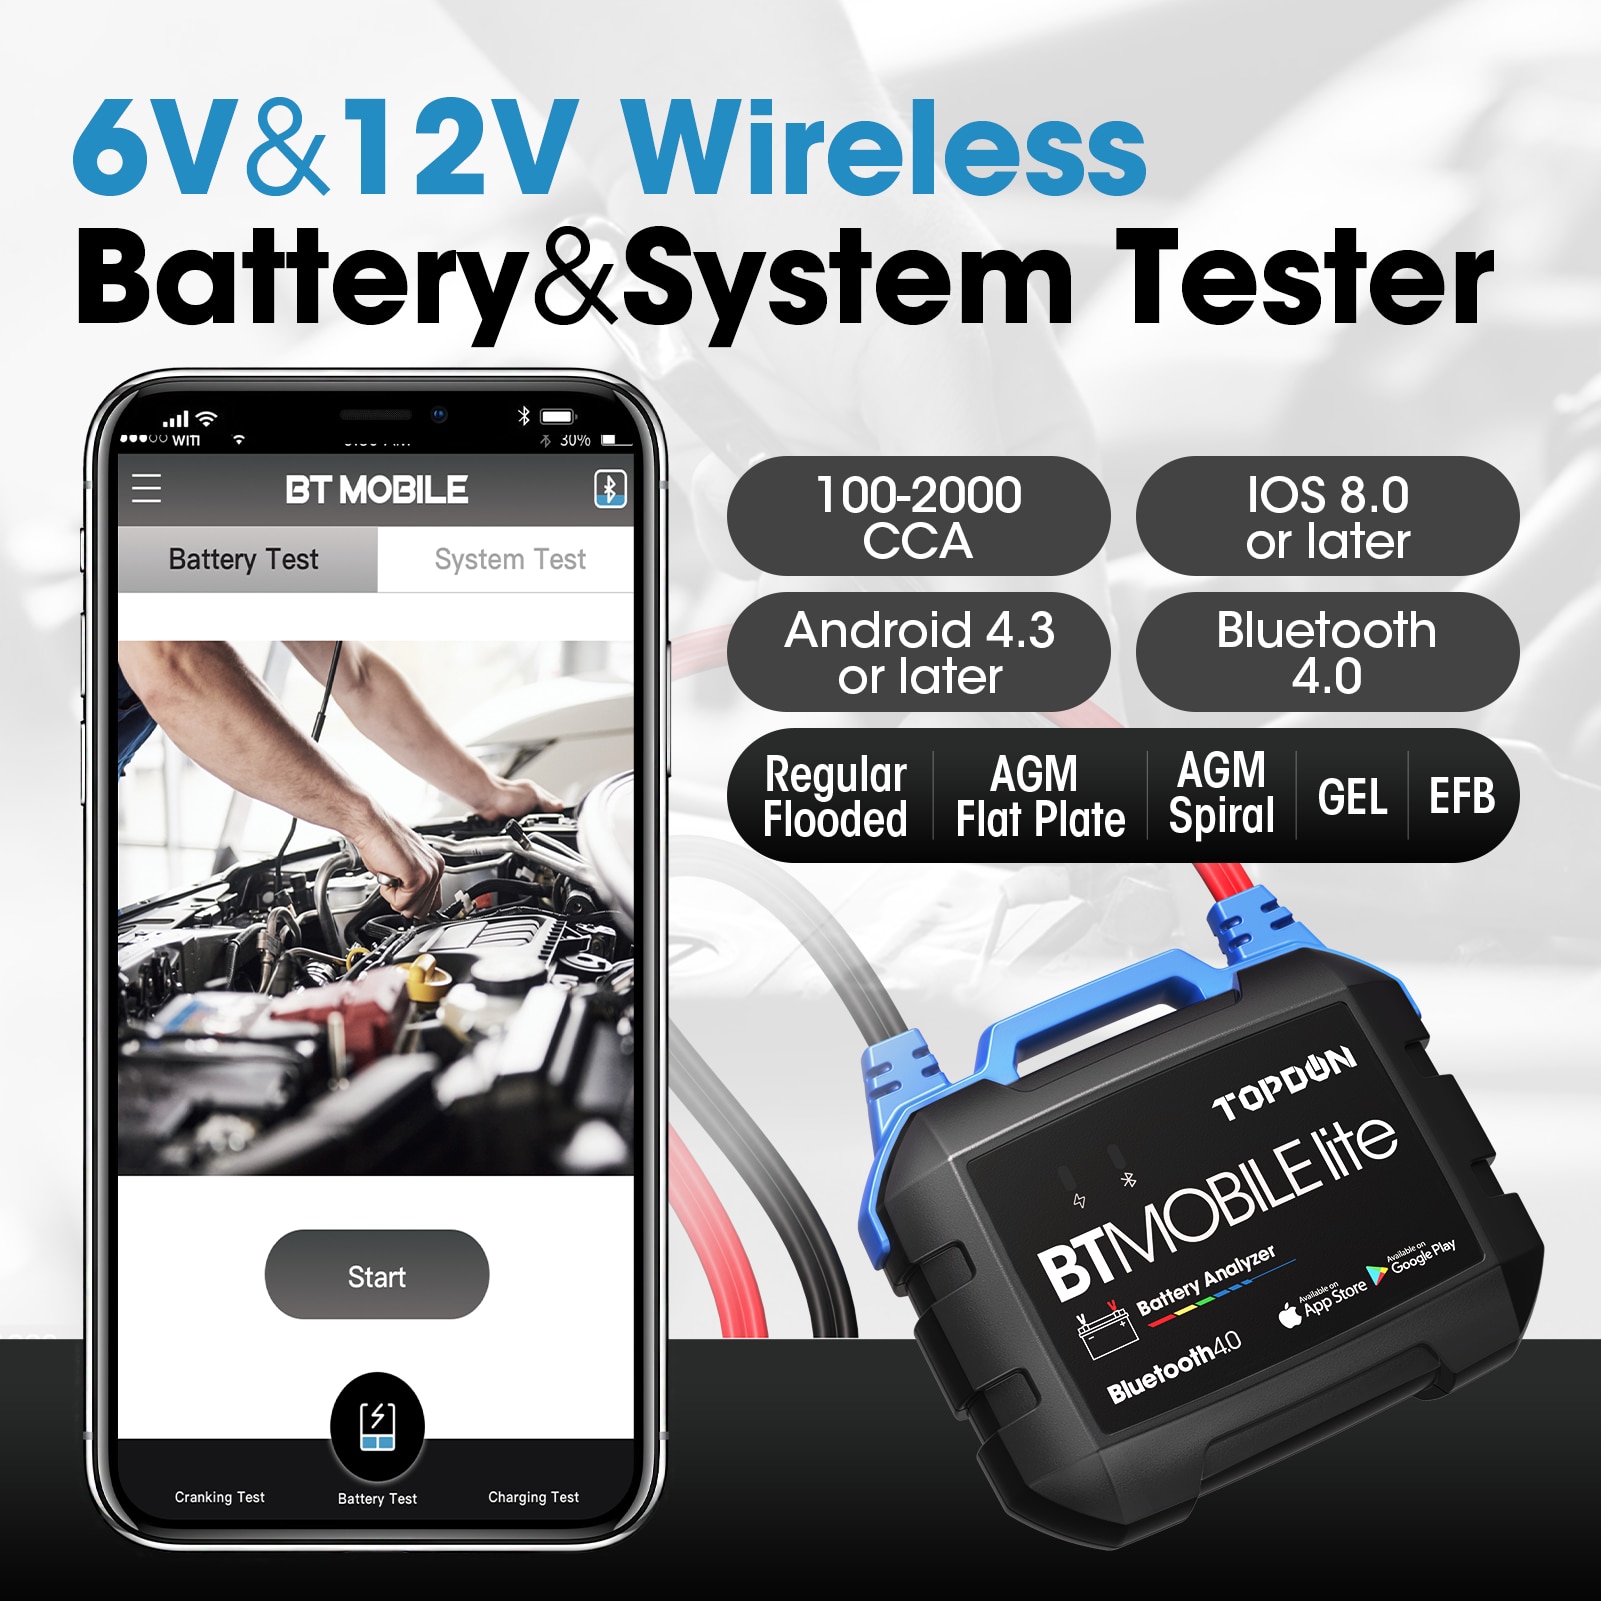 Wireless Car Battery Tester TOPDON BT Mobile Lite Bluetooth 100 -2000CCA Voltage Battery Tester Charger Analyzer Car Repair Tool